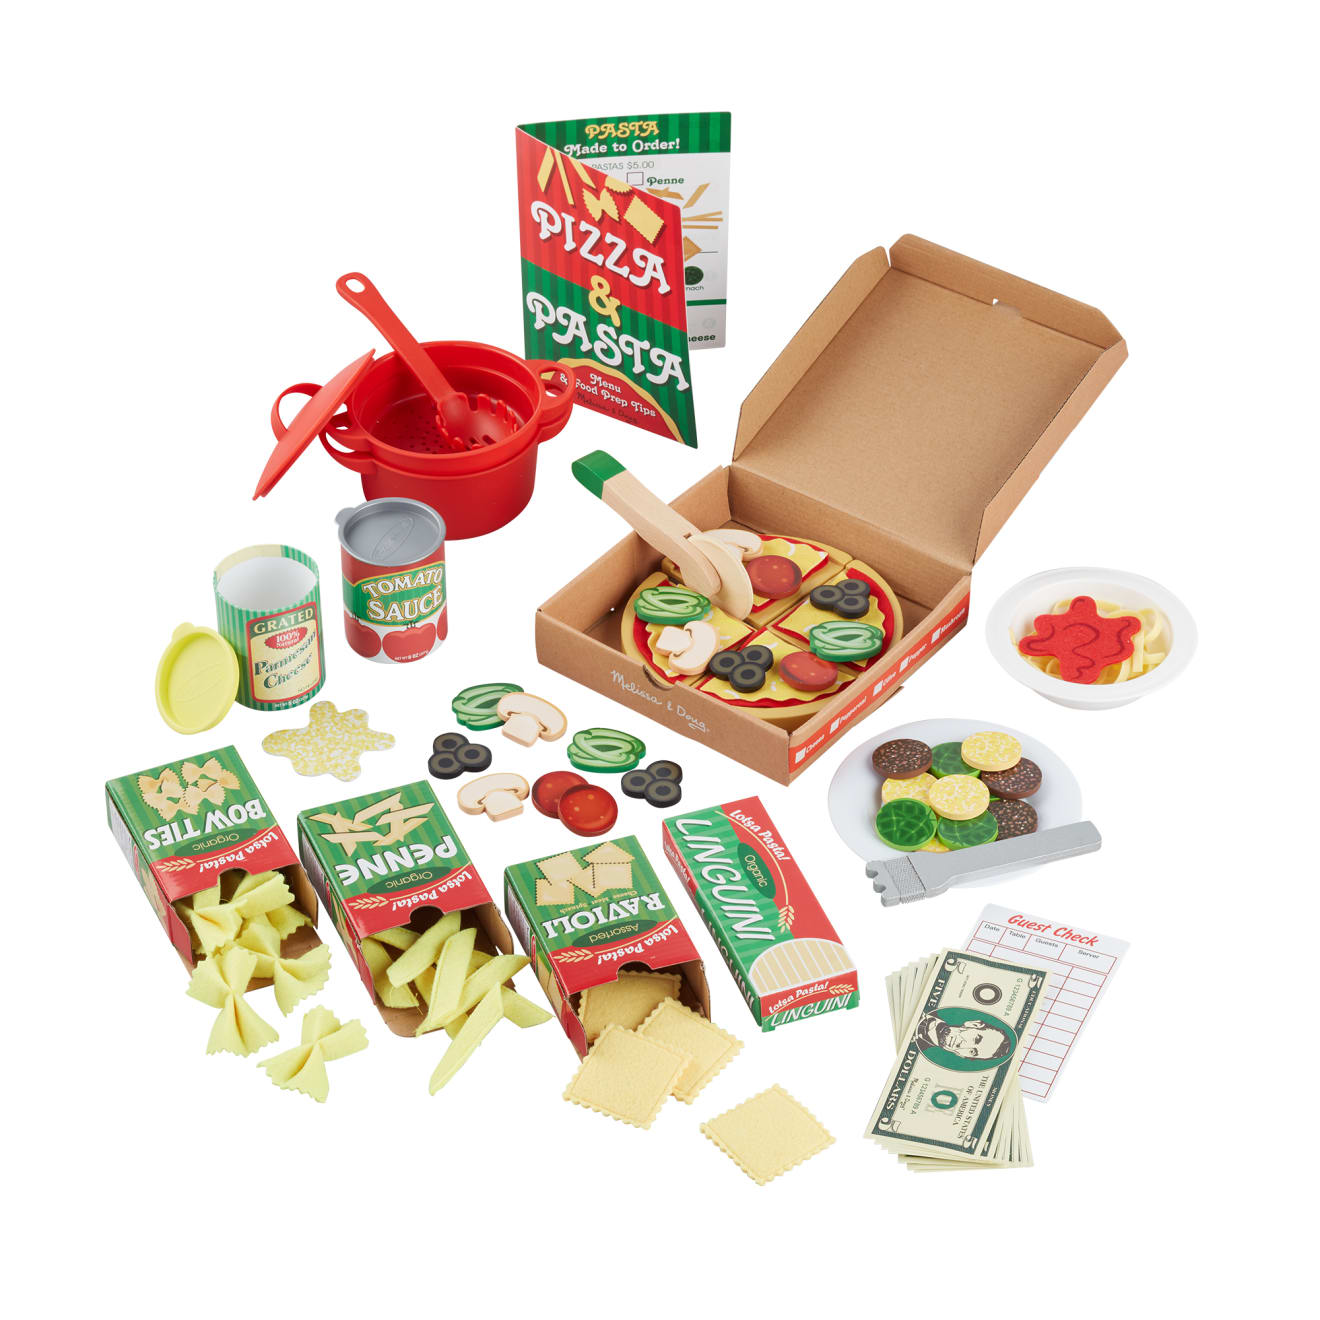 https://cdn.shopify.com/s/files/1/0550/8487/5830/products/Deluxe-Pizza-Pasta-Play-Set-017133-1-Pieces-Out.jpg?v=1664894519